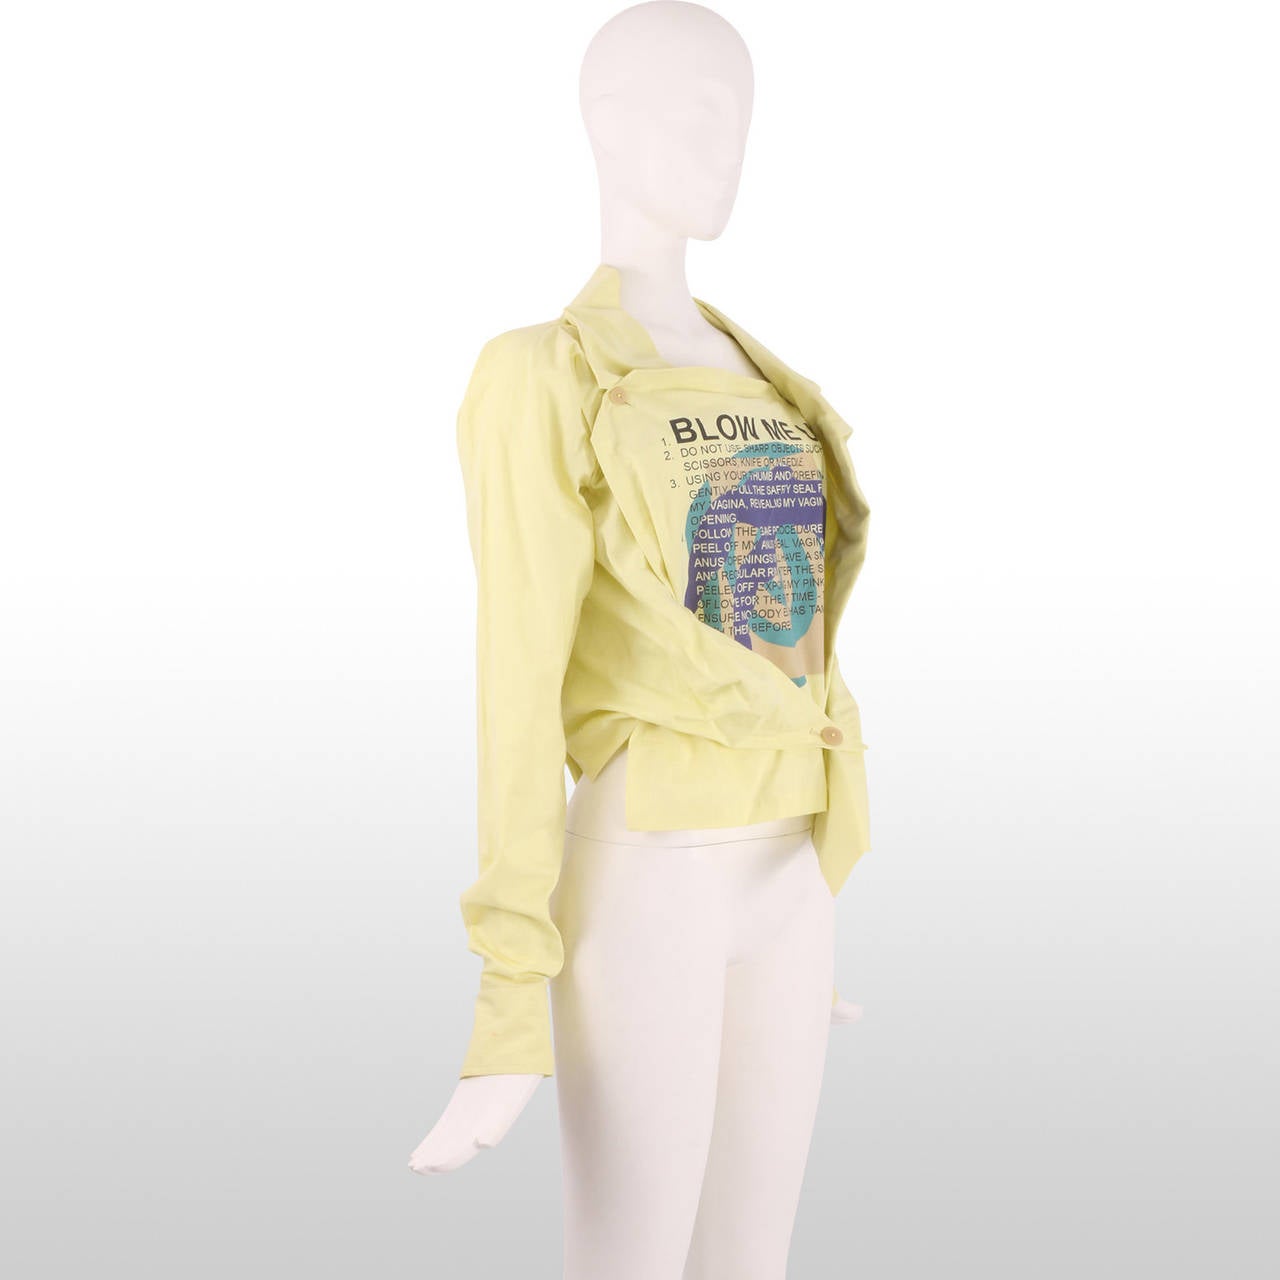 Here is a touch of boldness with this Vivienne Westwood printed blouse from the 2005 autumn winter collection. The light lemon yellow cotton contrasts quite strongly with the centered 